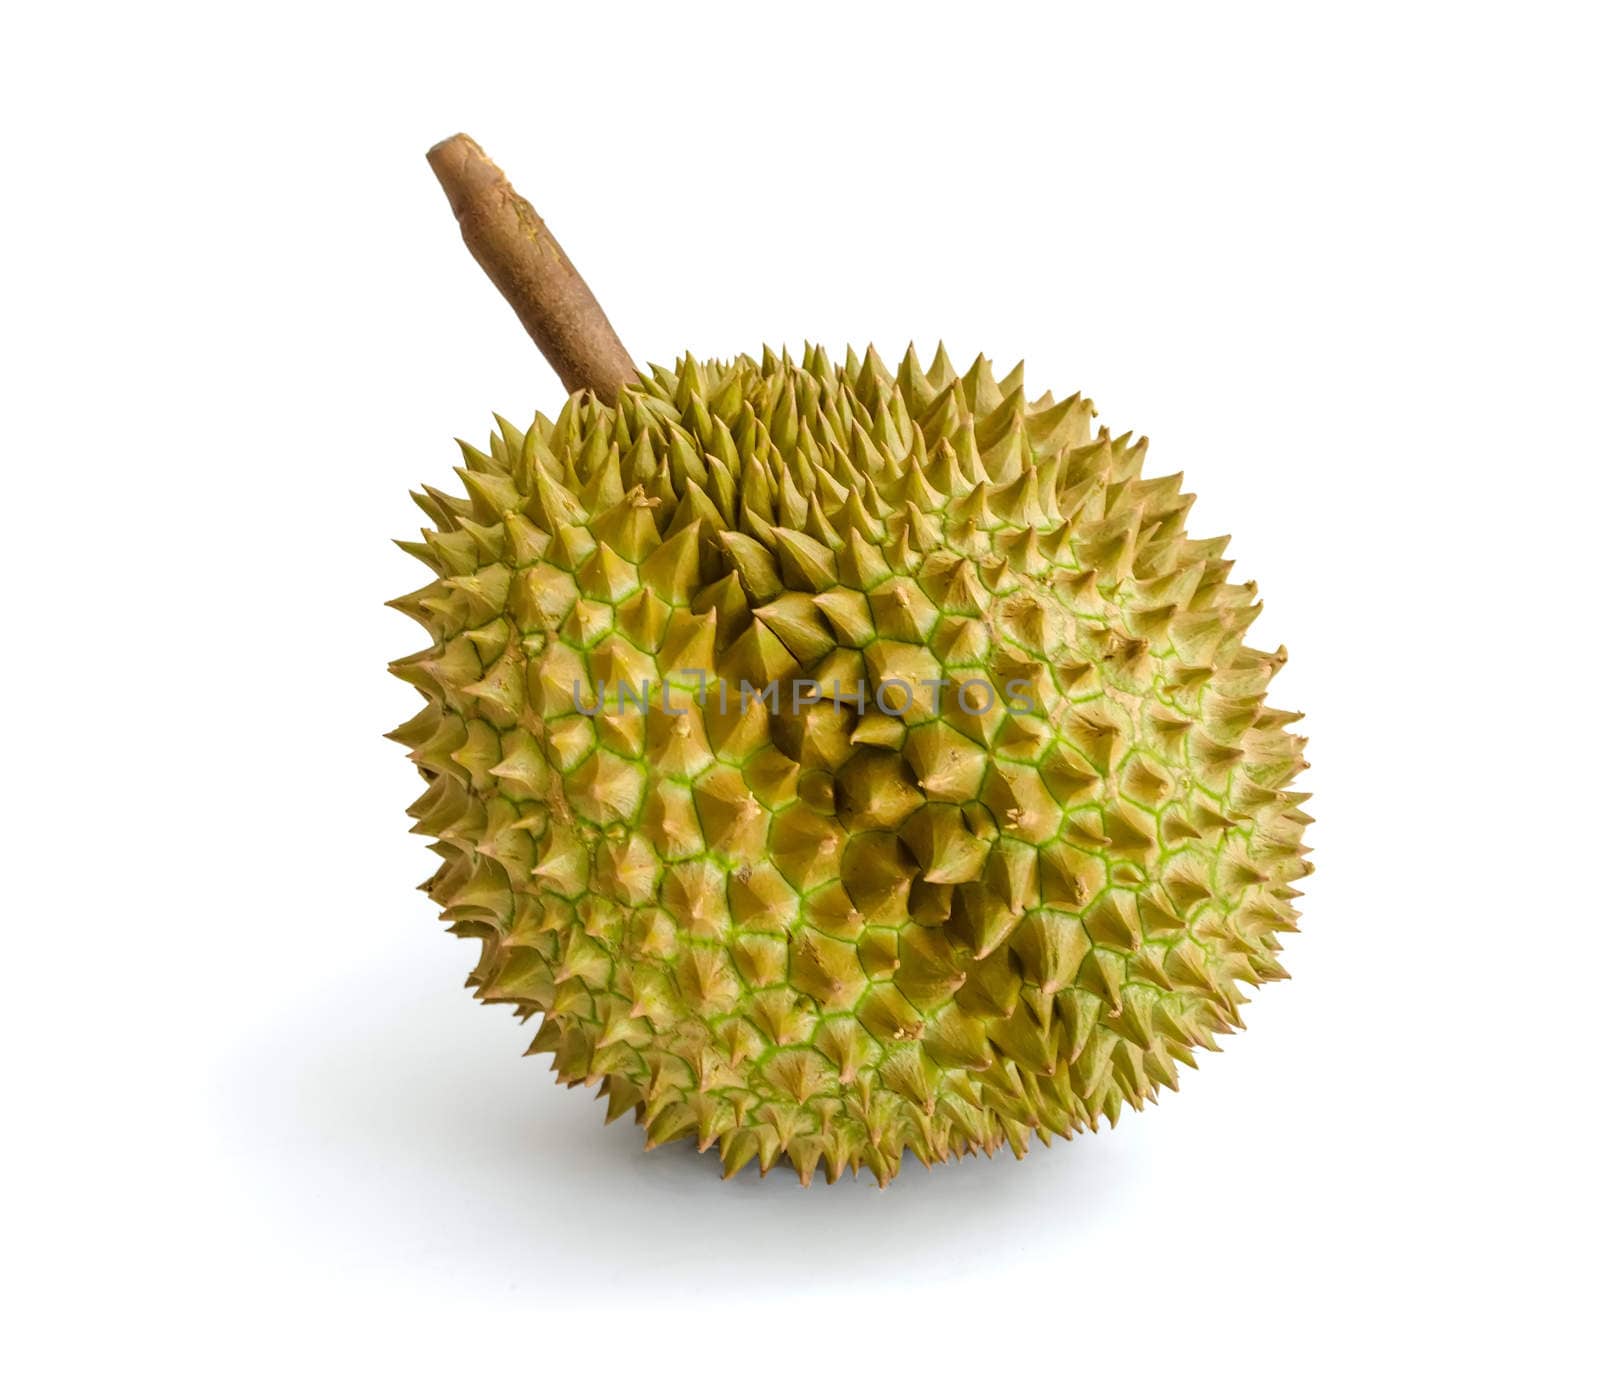 Durian, the king of fruits in South East Asia on background. by kefiiir